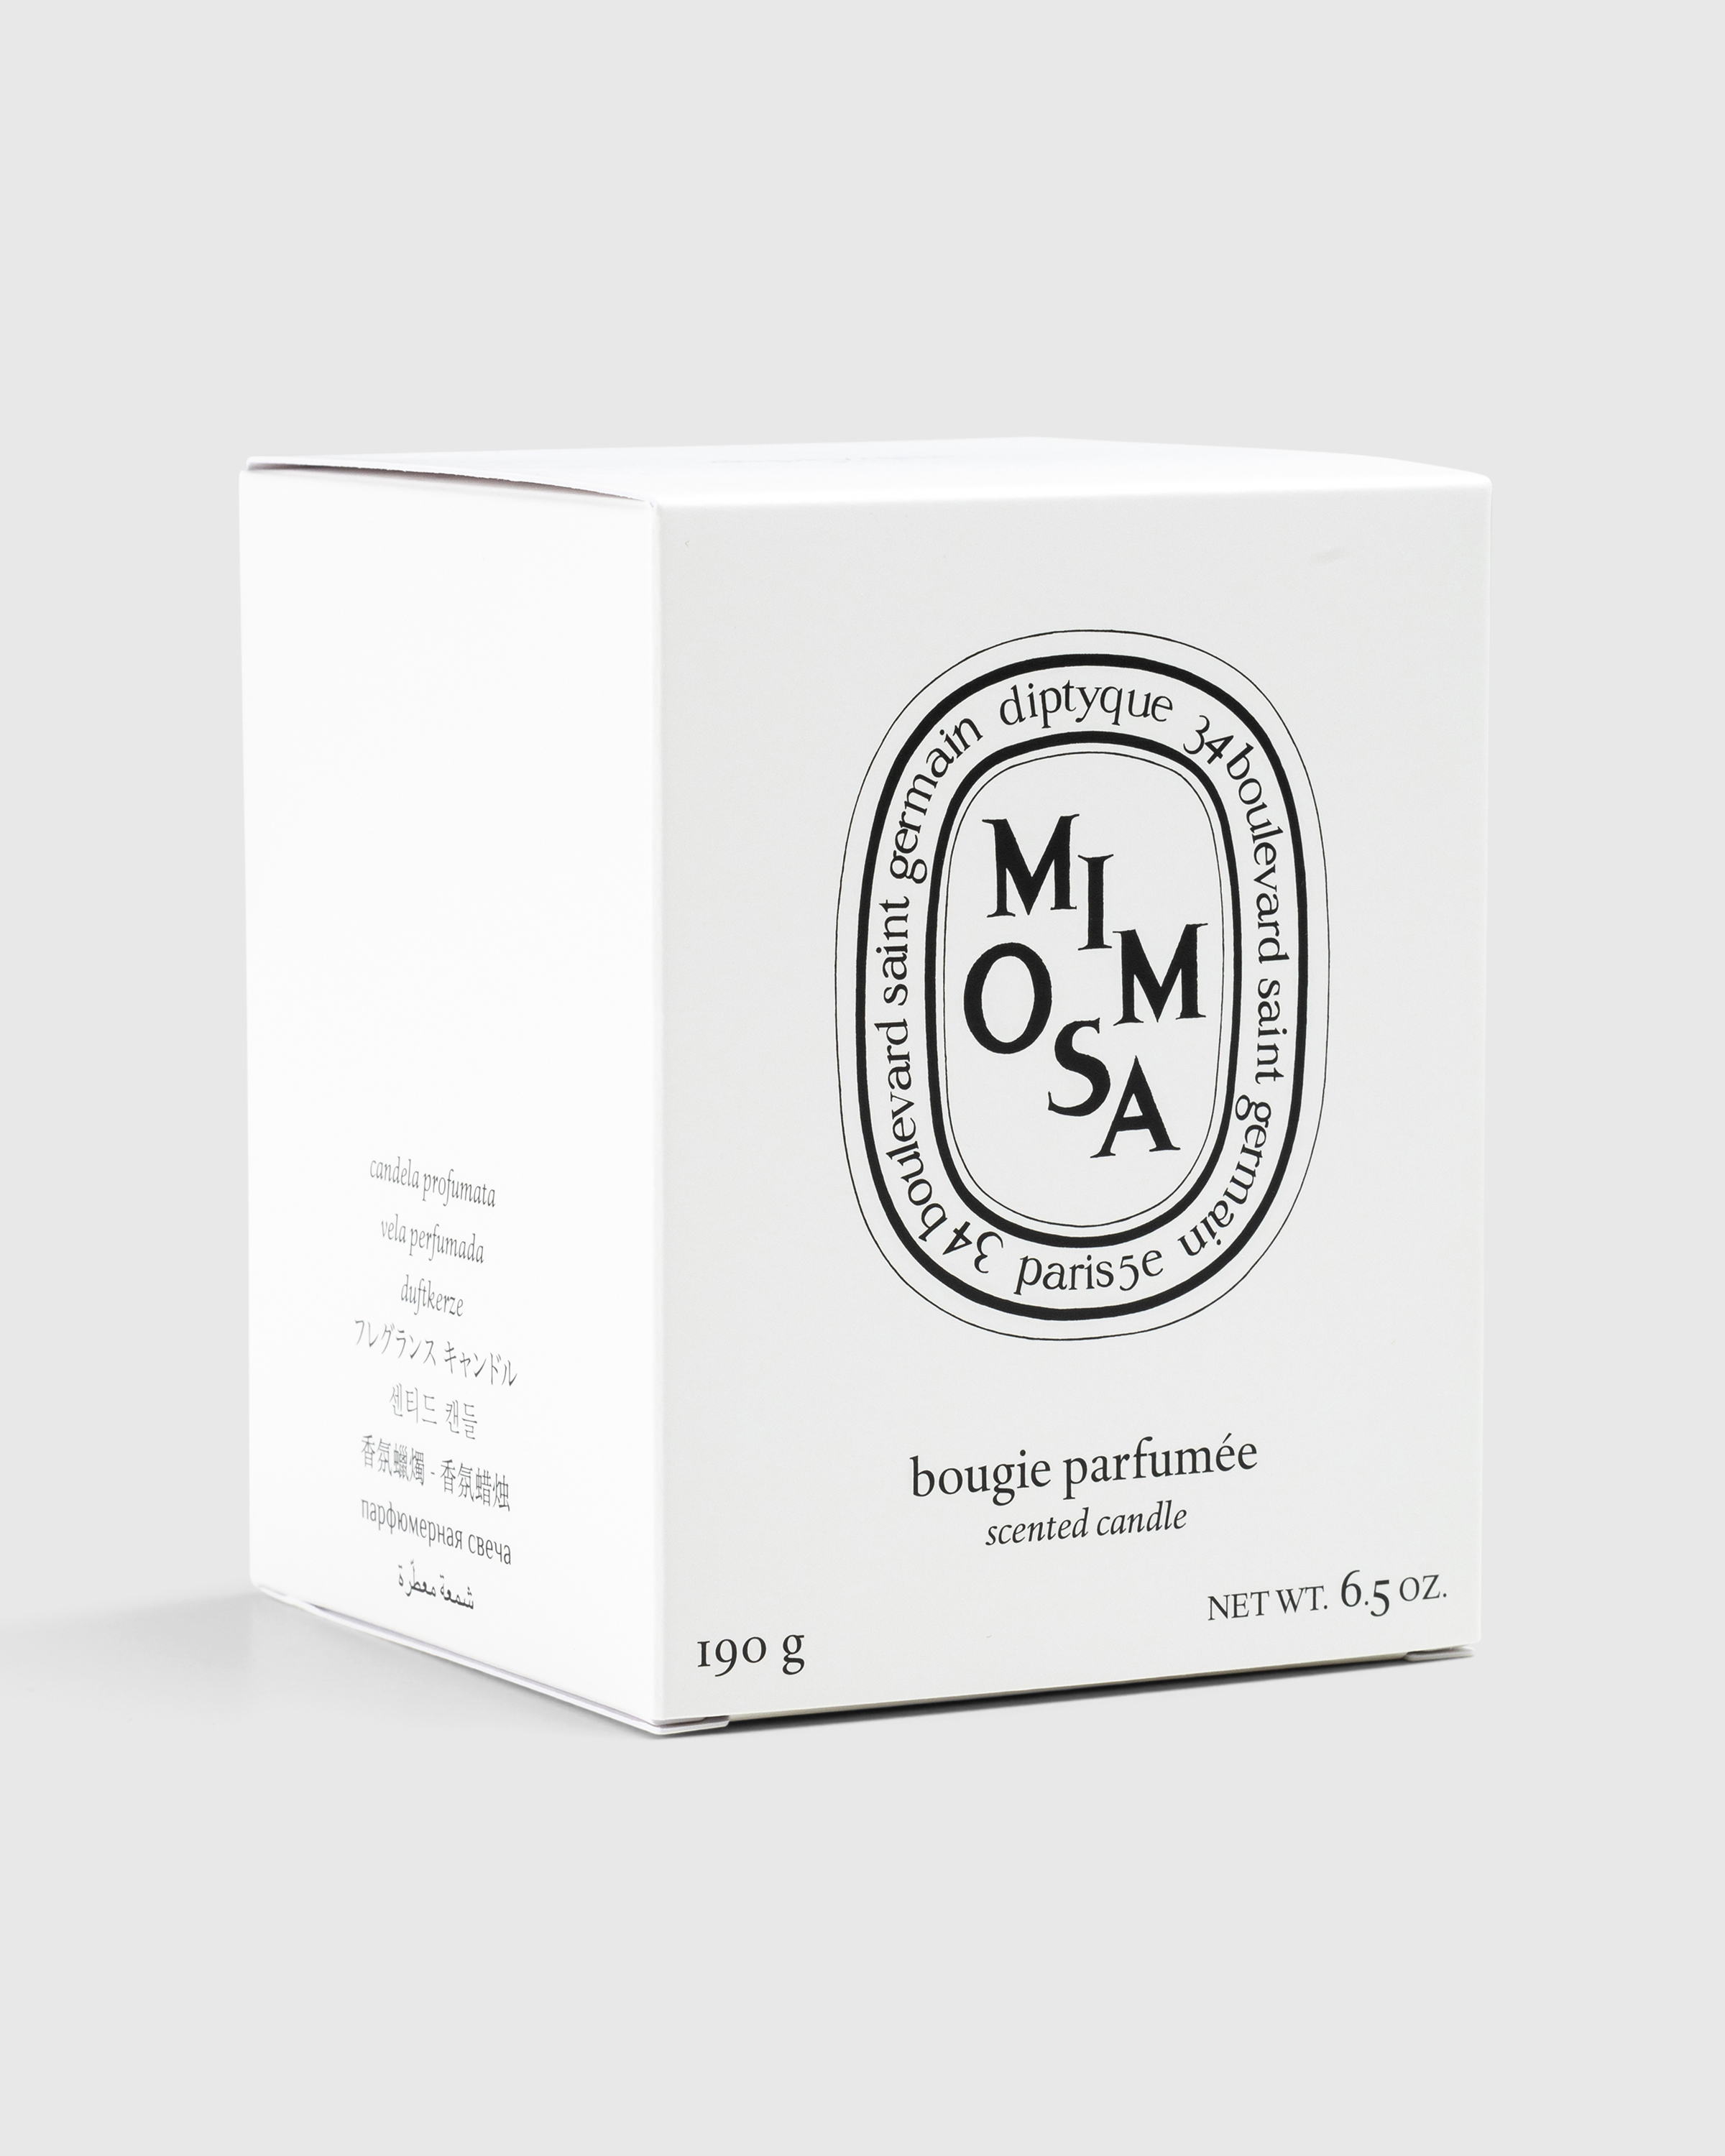 Diptyque – Standard Candle Mimosa 190g - Candles & Fragrances - White - Image 3